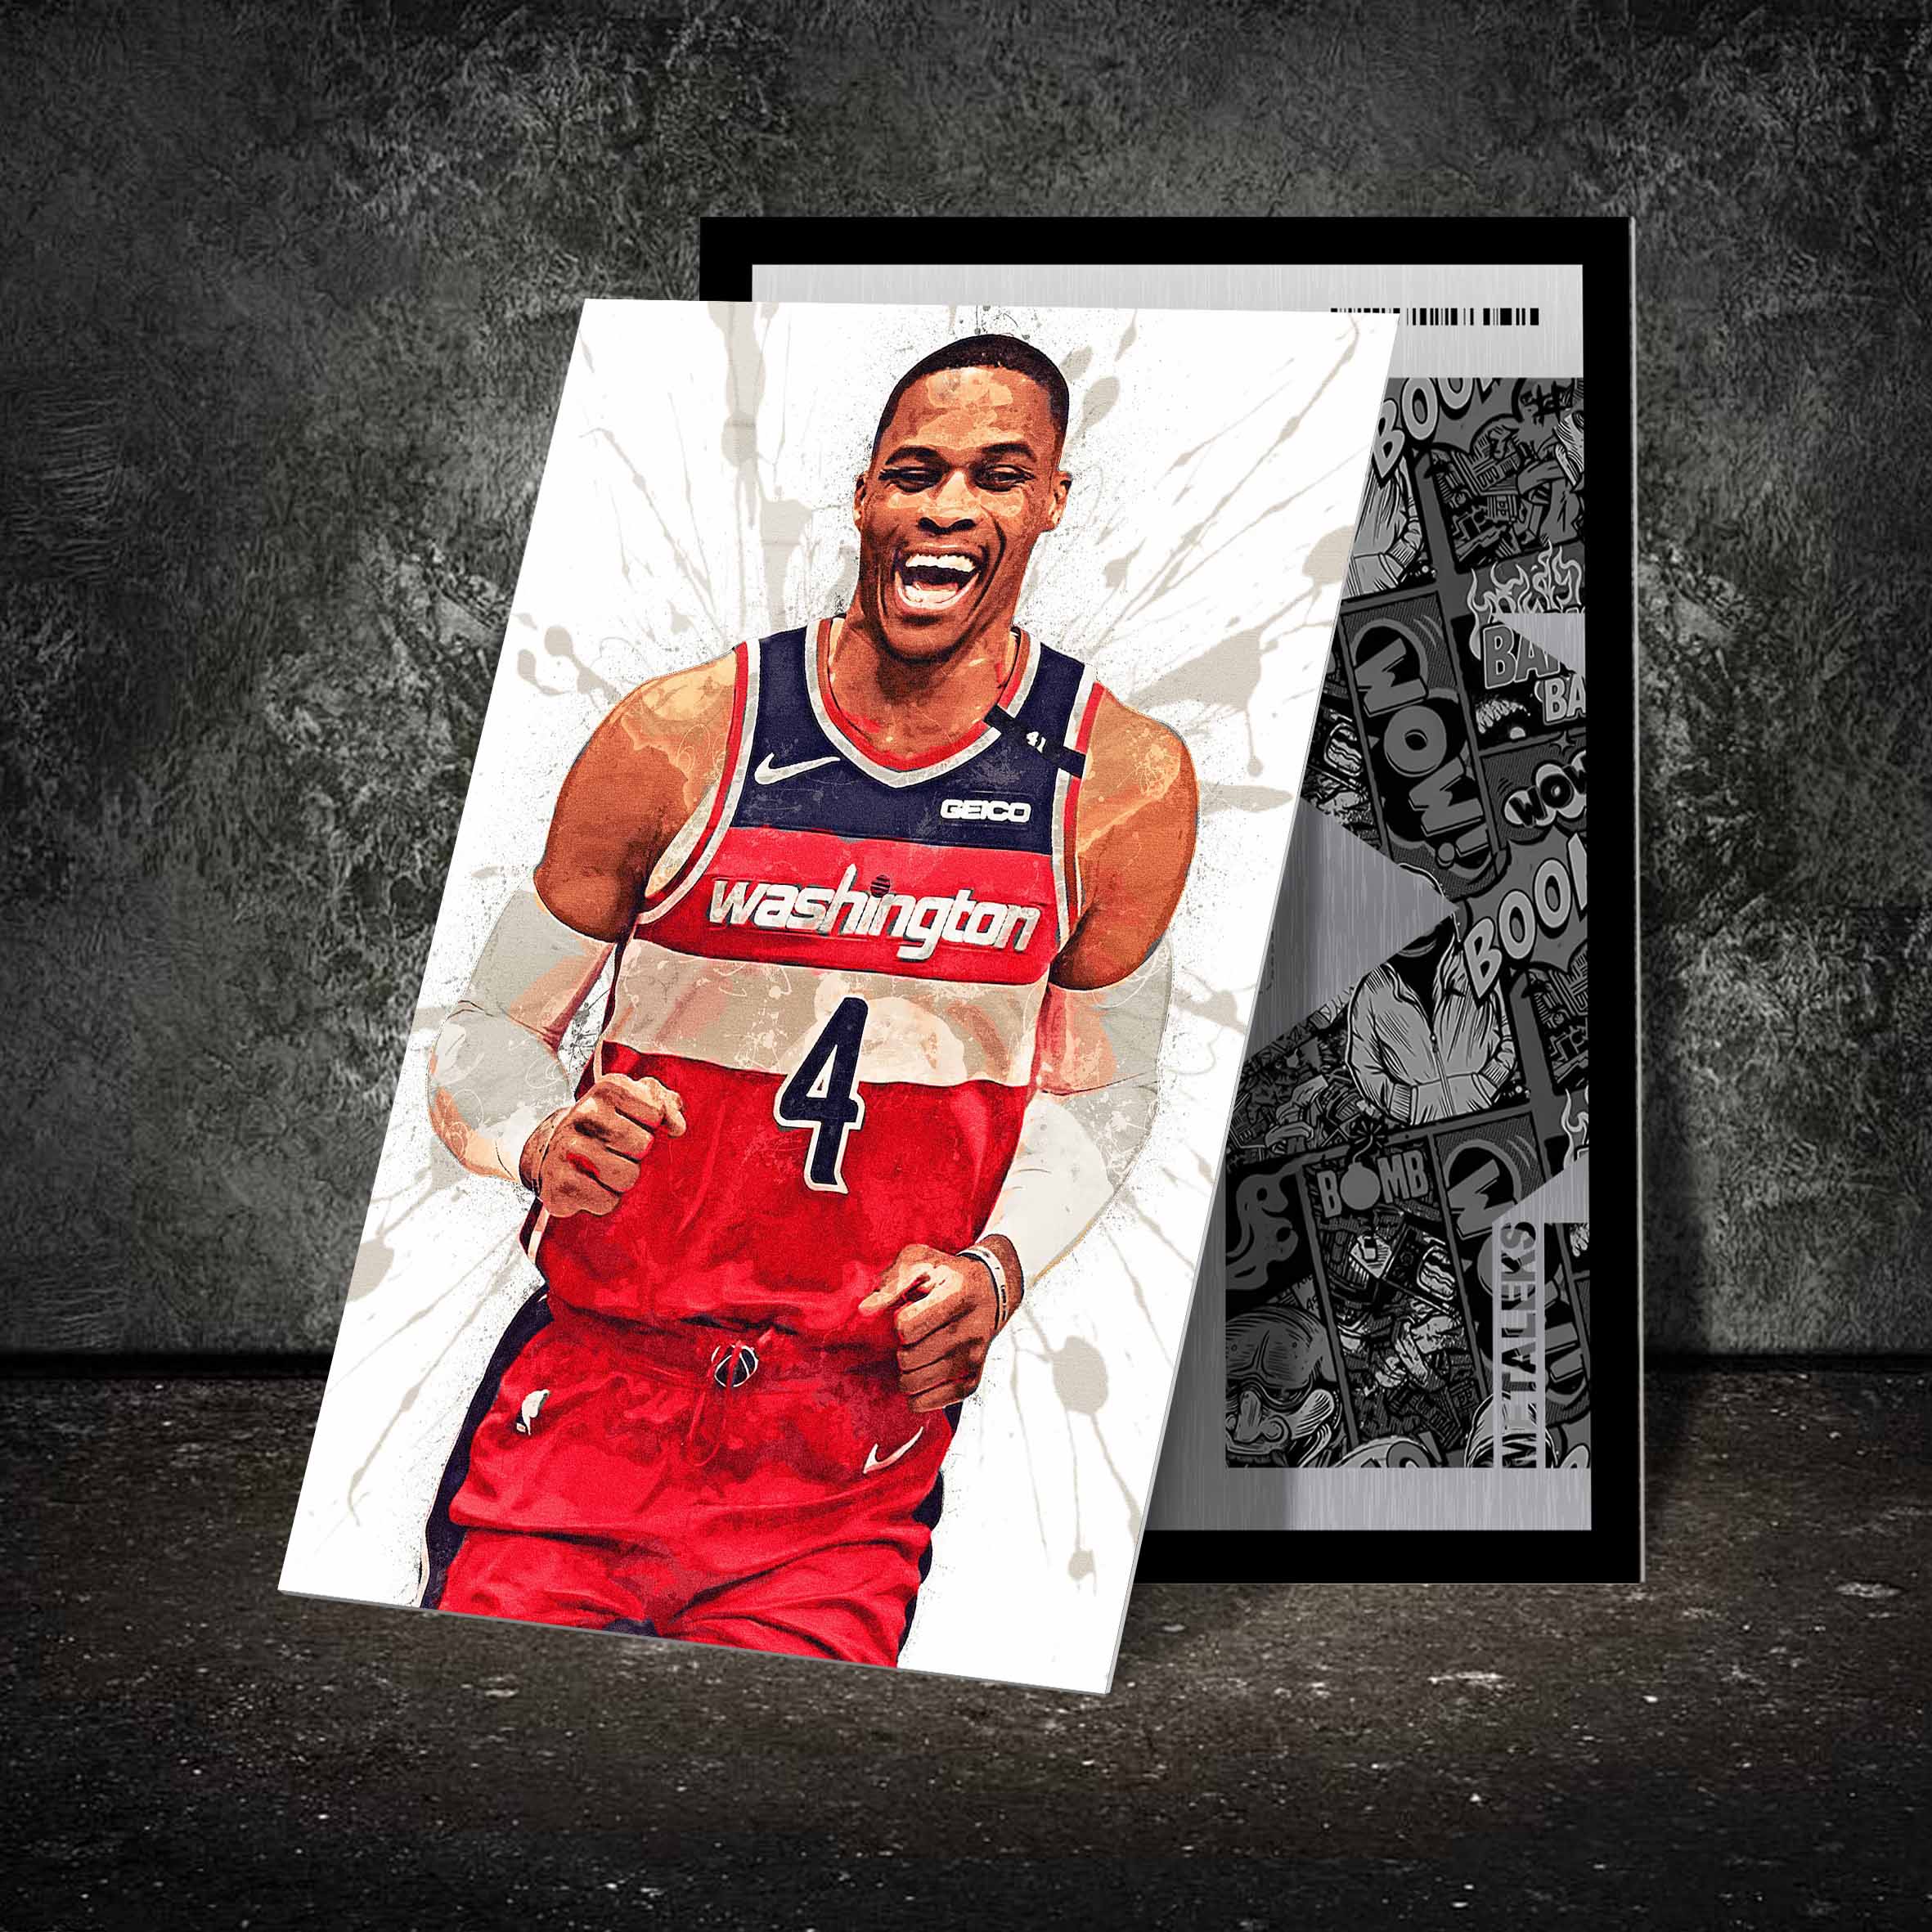 Russell Westbrook Washington Wizards-designed by @Hoang Van Thuan